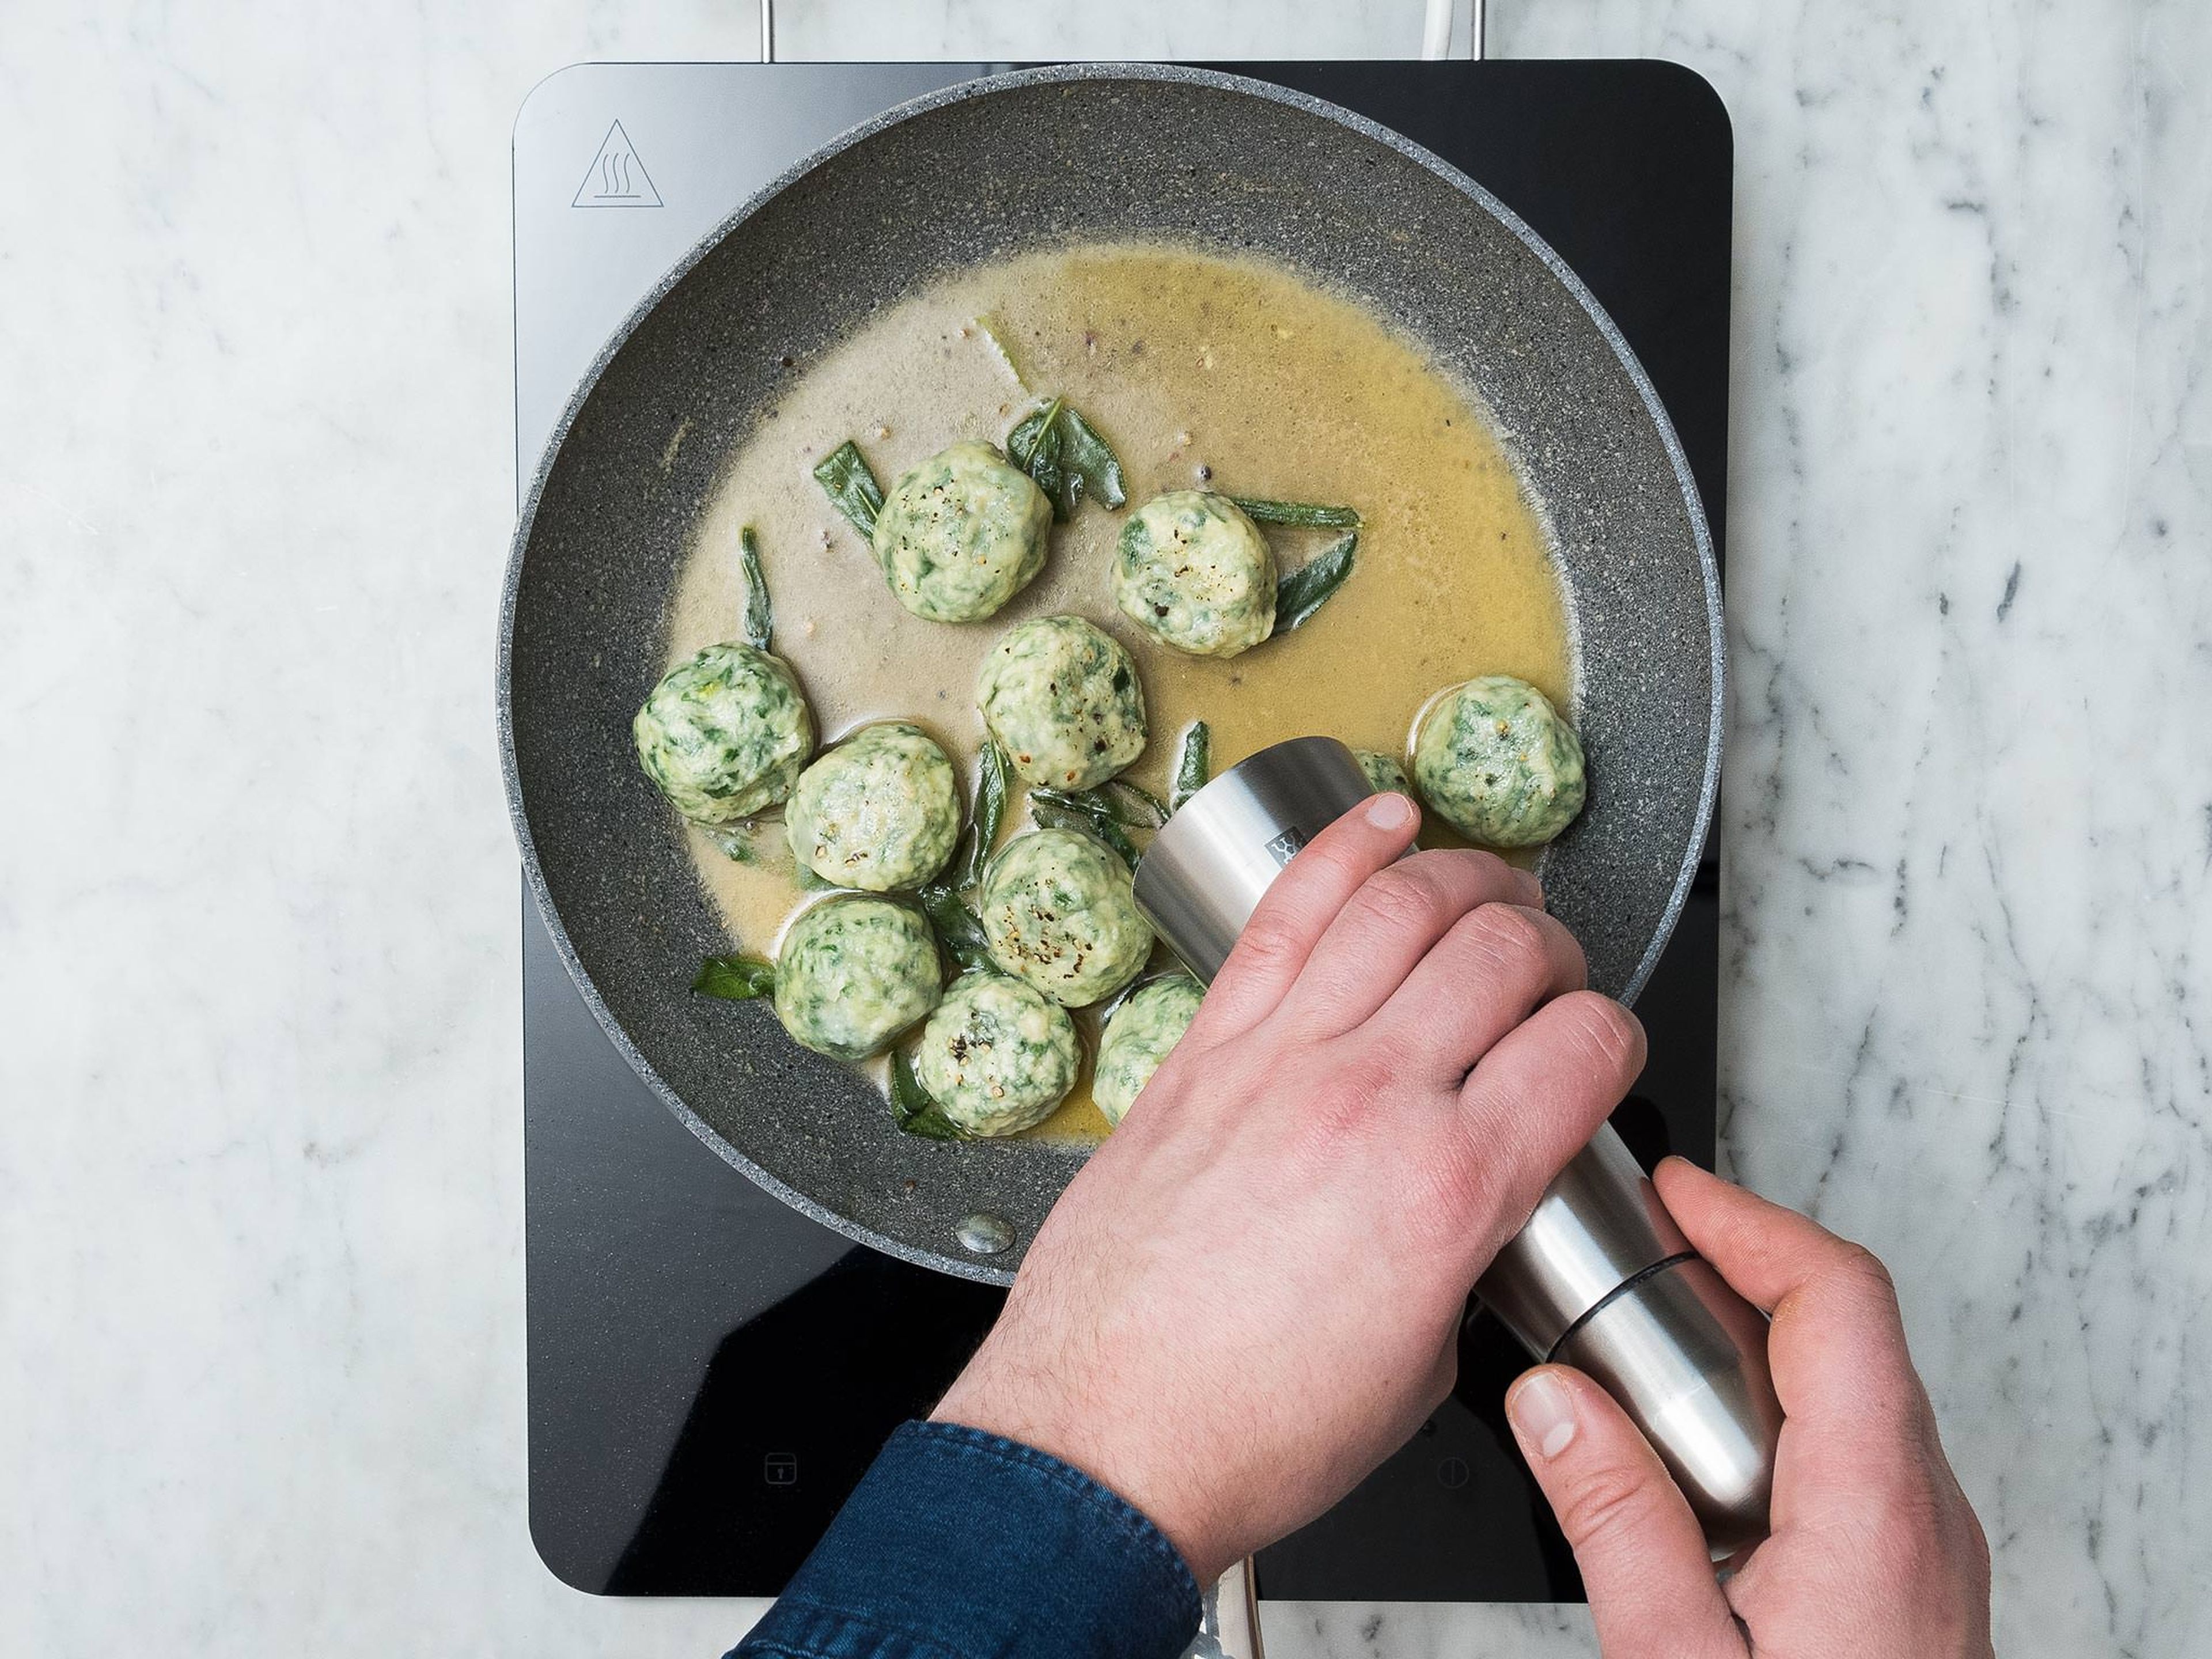 In the meantime, prepare the sauce by melting the butter in a frying pan over medium heat with the sage leaves. When butter is melted and before it begins to brown, add about 2-3 spoonfuls of the gnudi cooking water and swirl the pan to create a thick sauce. Season with salt and pepper, adding more gnudi cooking water if needed.